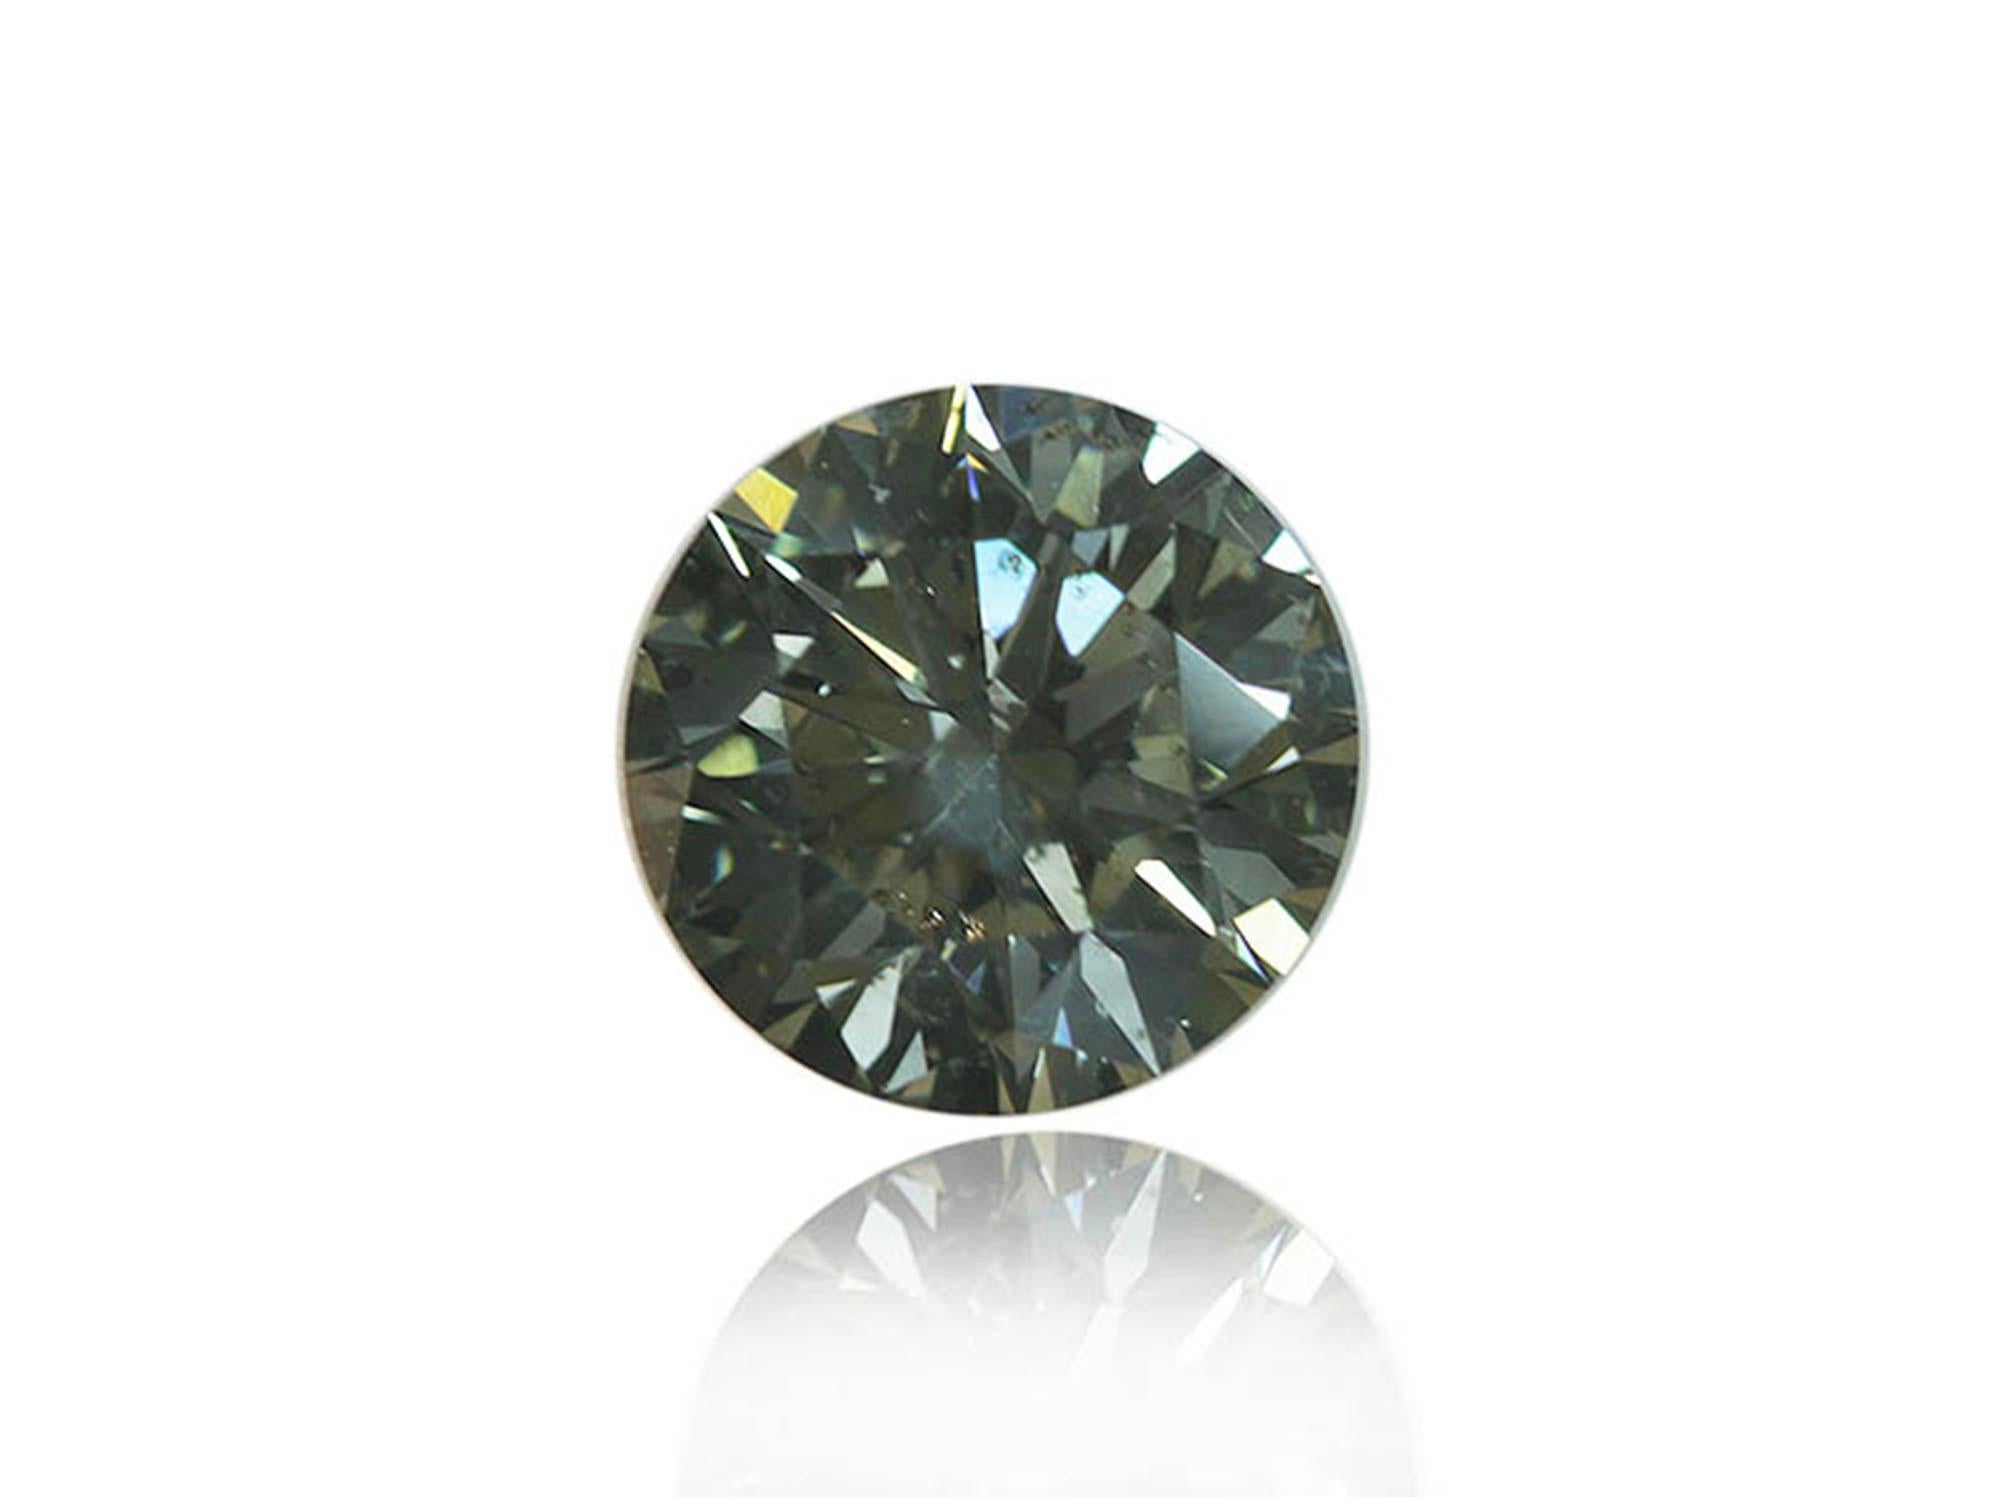 Engagement ring style showcasing a 2.00 carat Fancy Gray-Yellowish Green Diamond Round brilliant cut, GIA certified as SI2 clarity and Excellent polish and Symmetry at the center.
The classic design brings out the beauty of the center stone with the